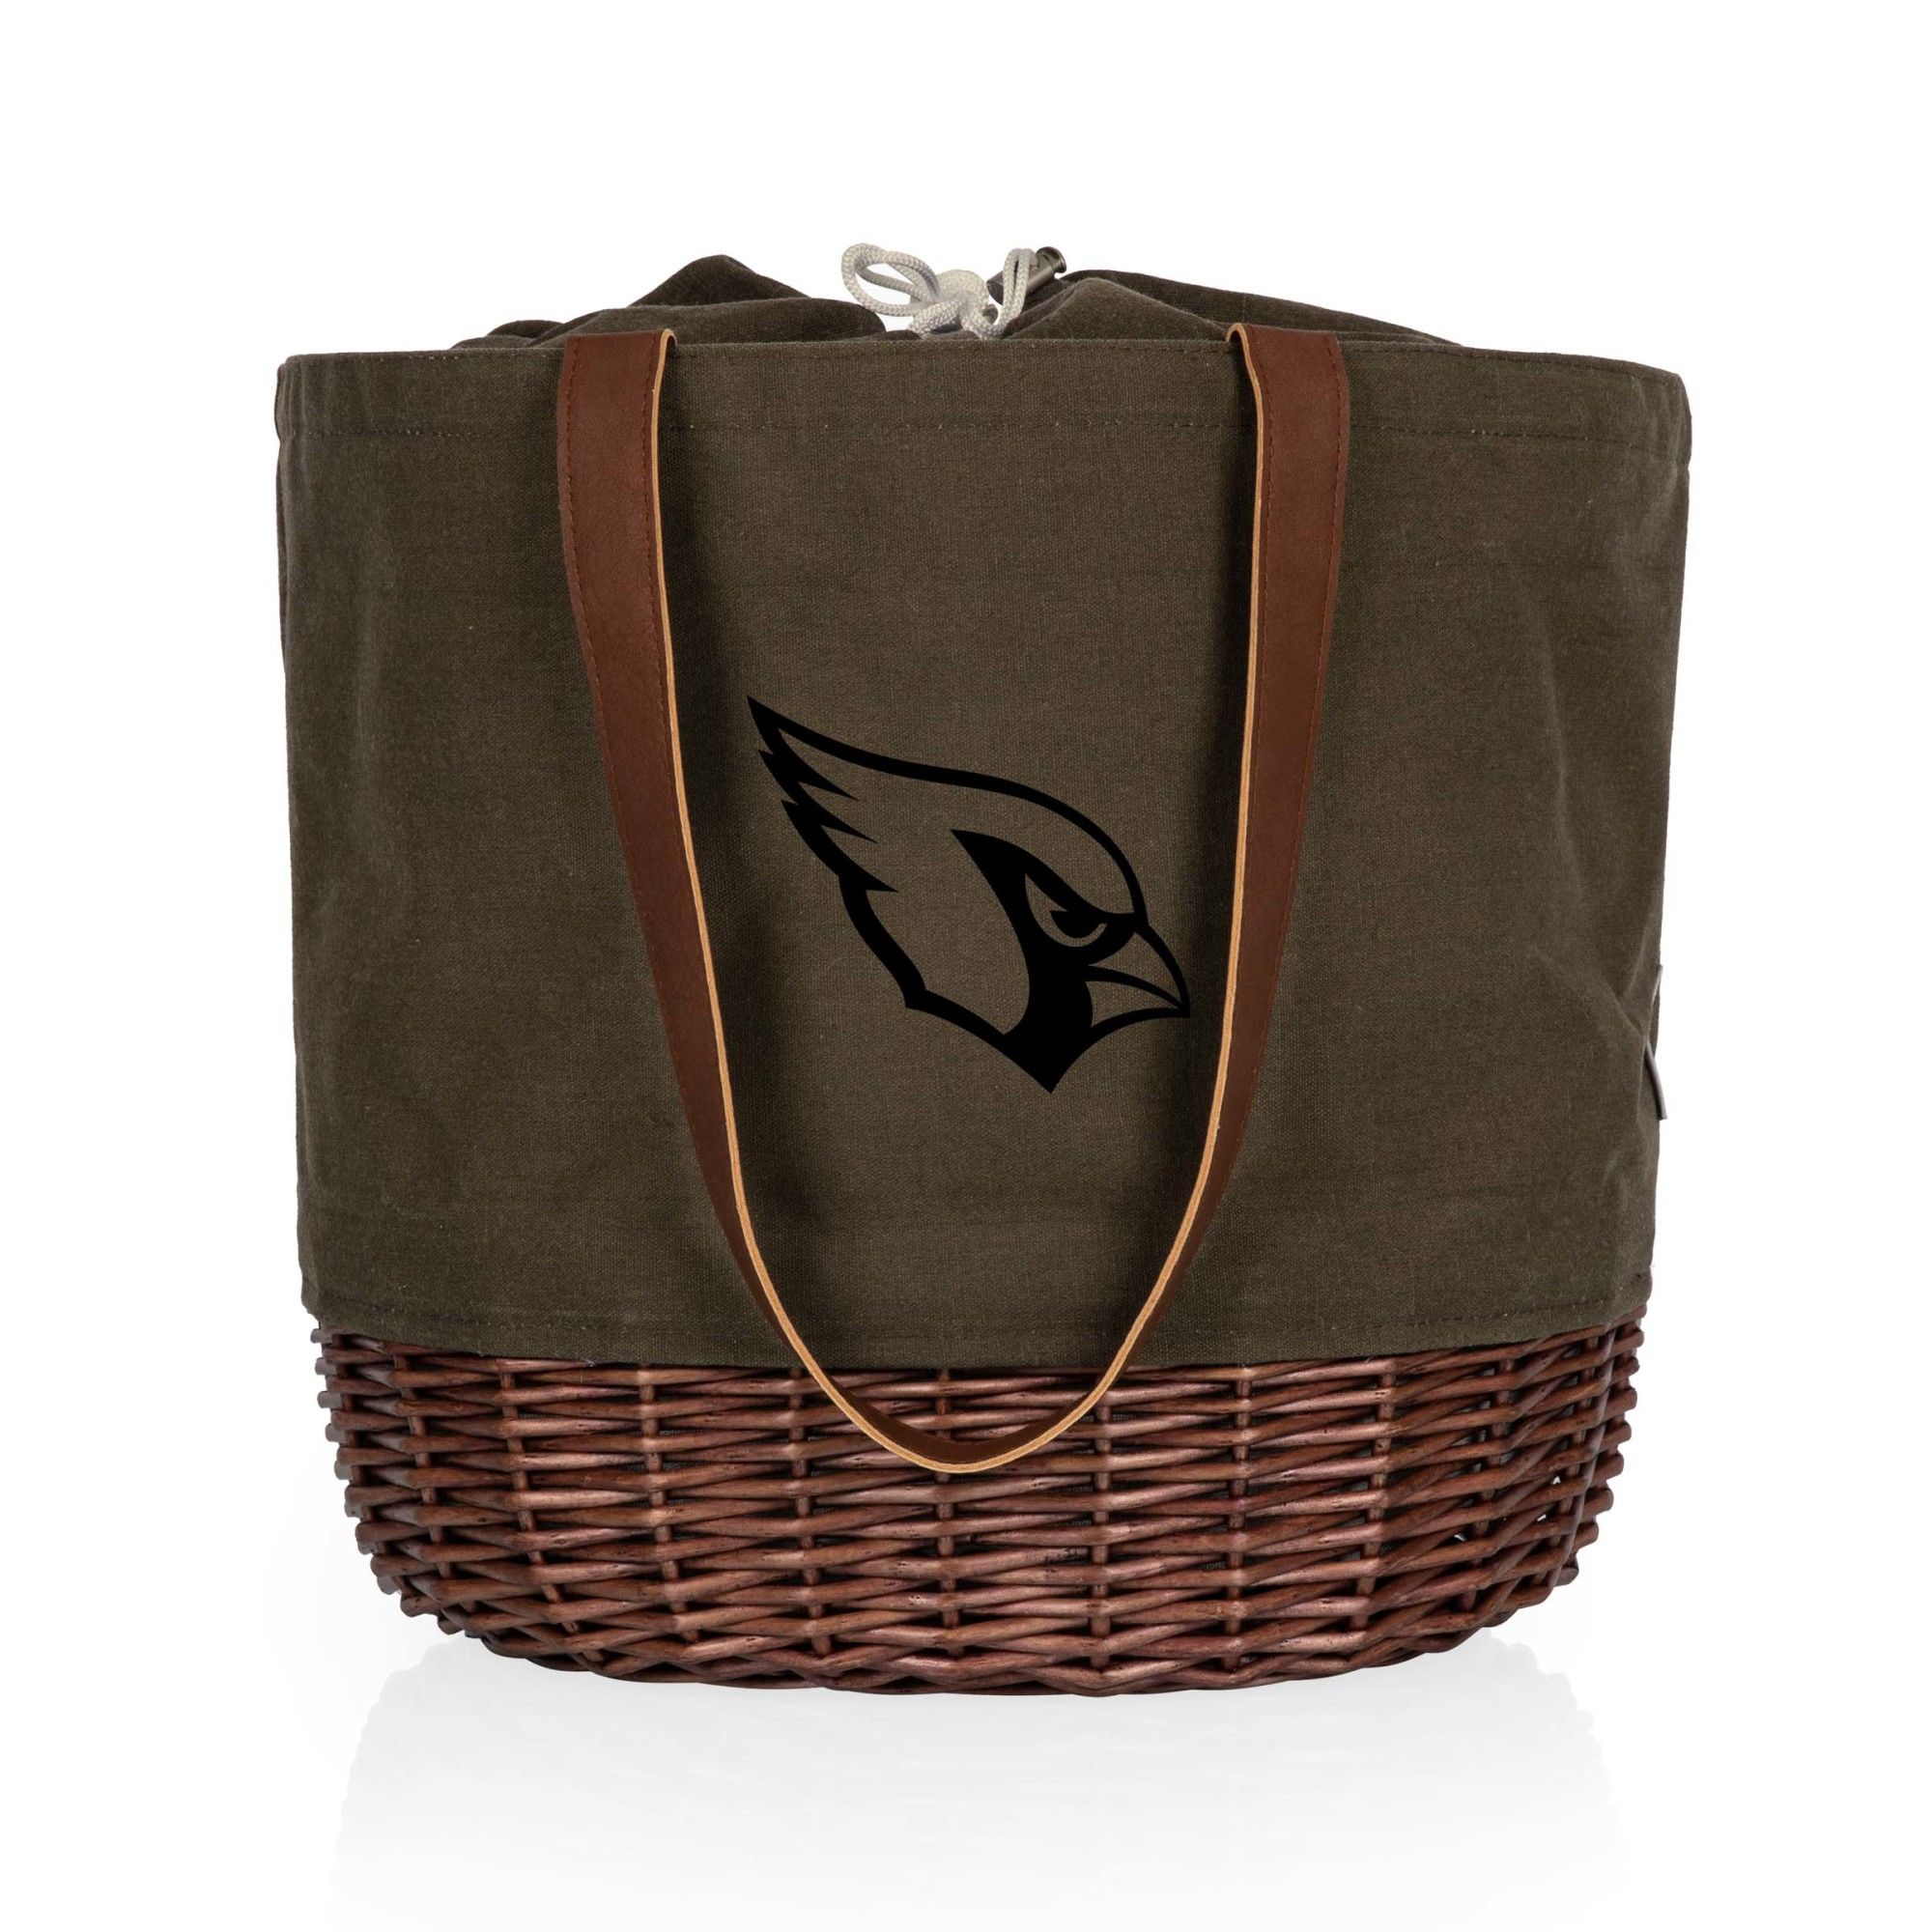 Arizona Cardinals - Coronado Canvas and Willow Basket Tote, (Khaki Green with Beige Accents)